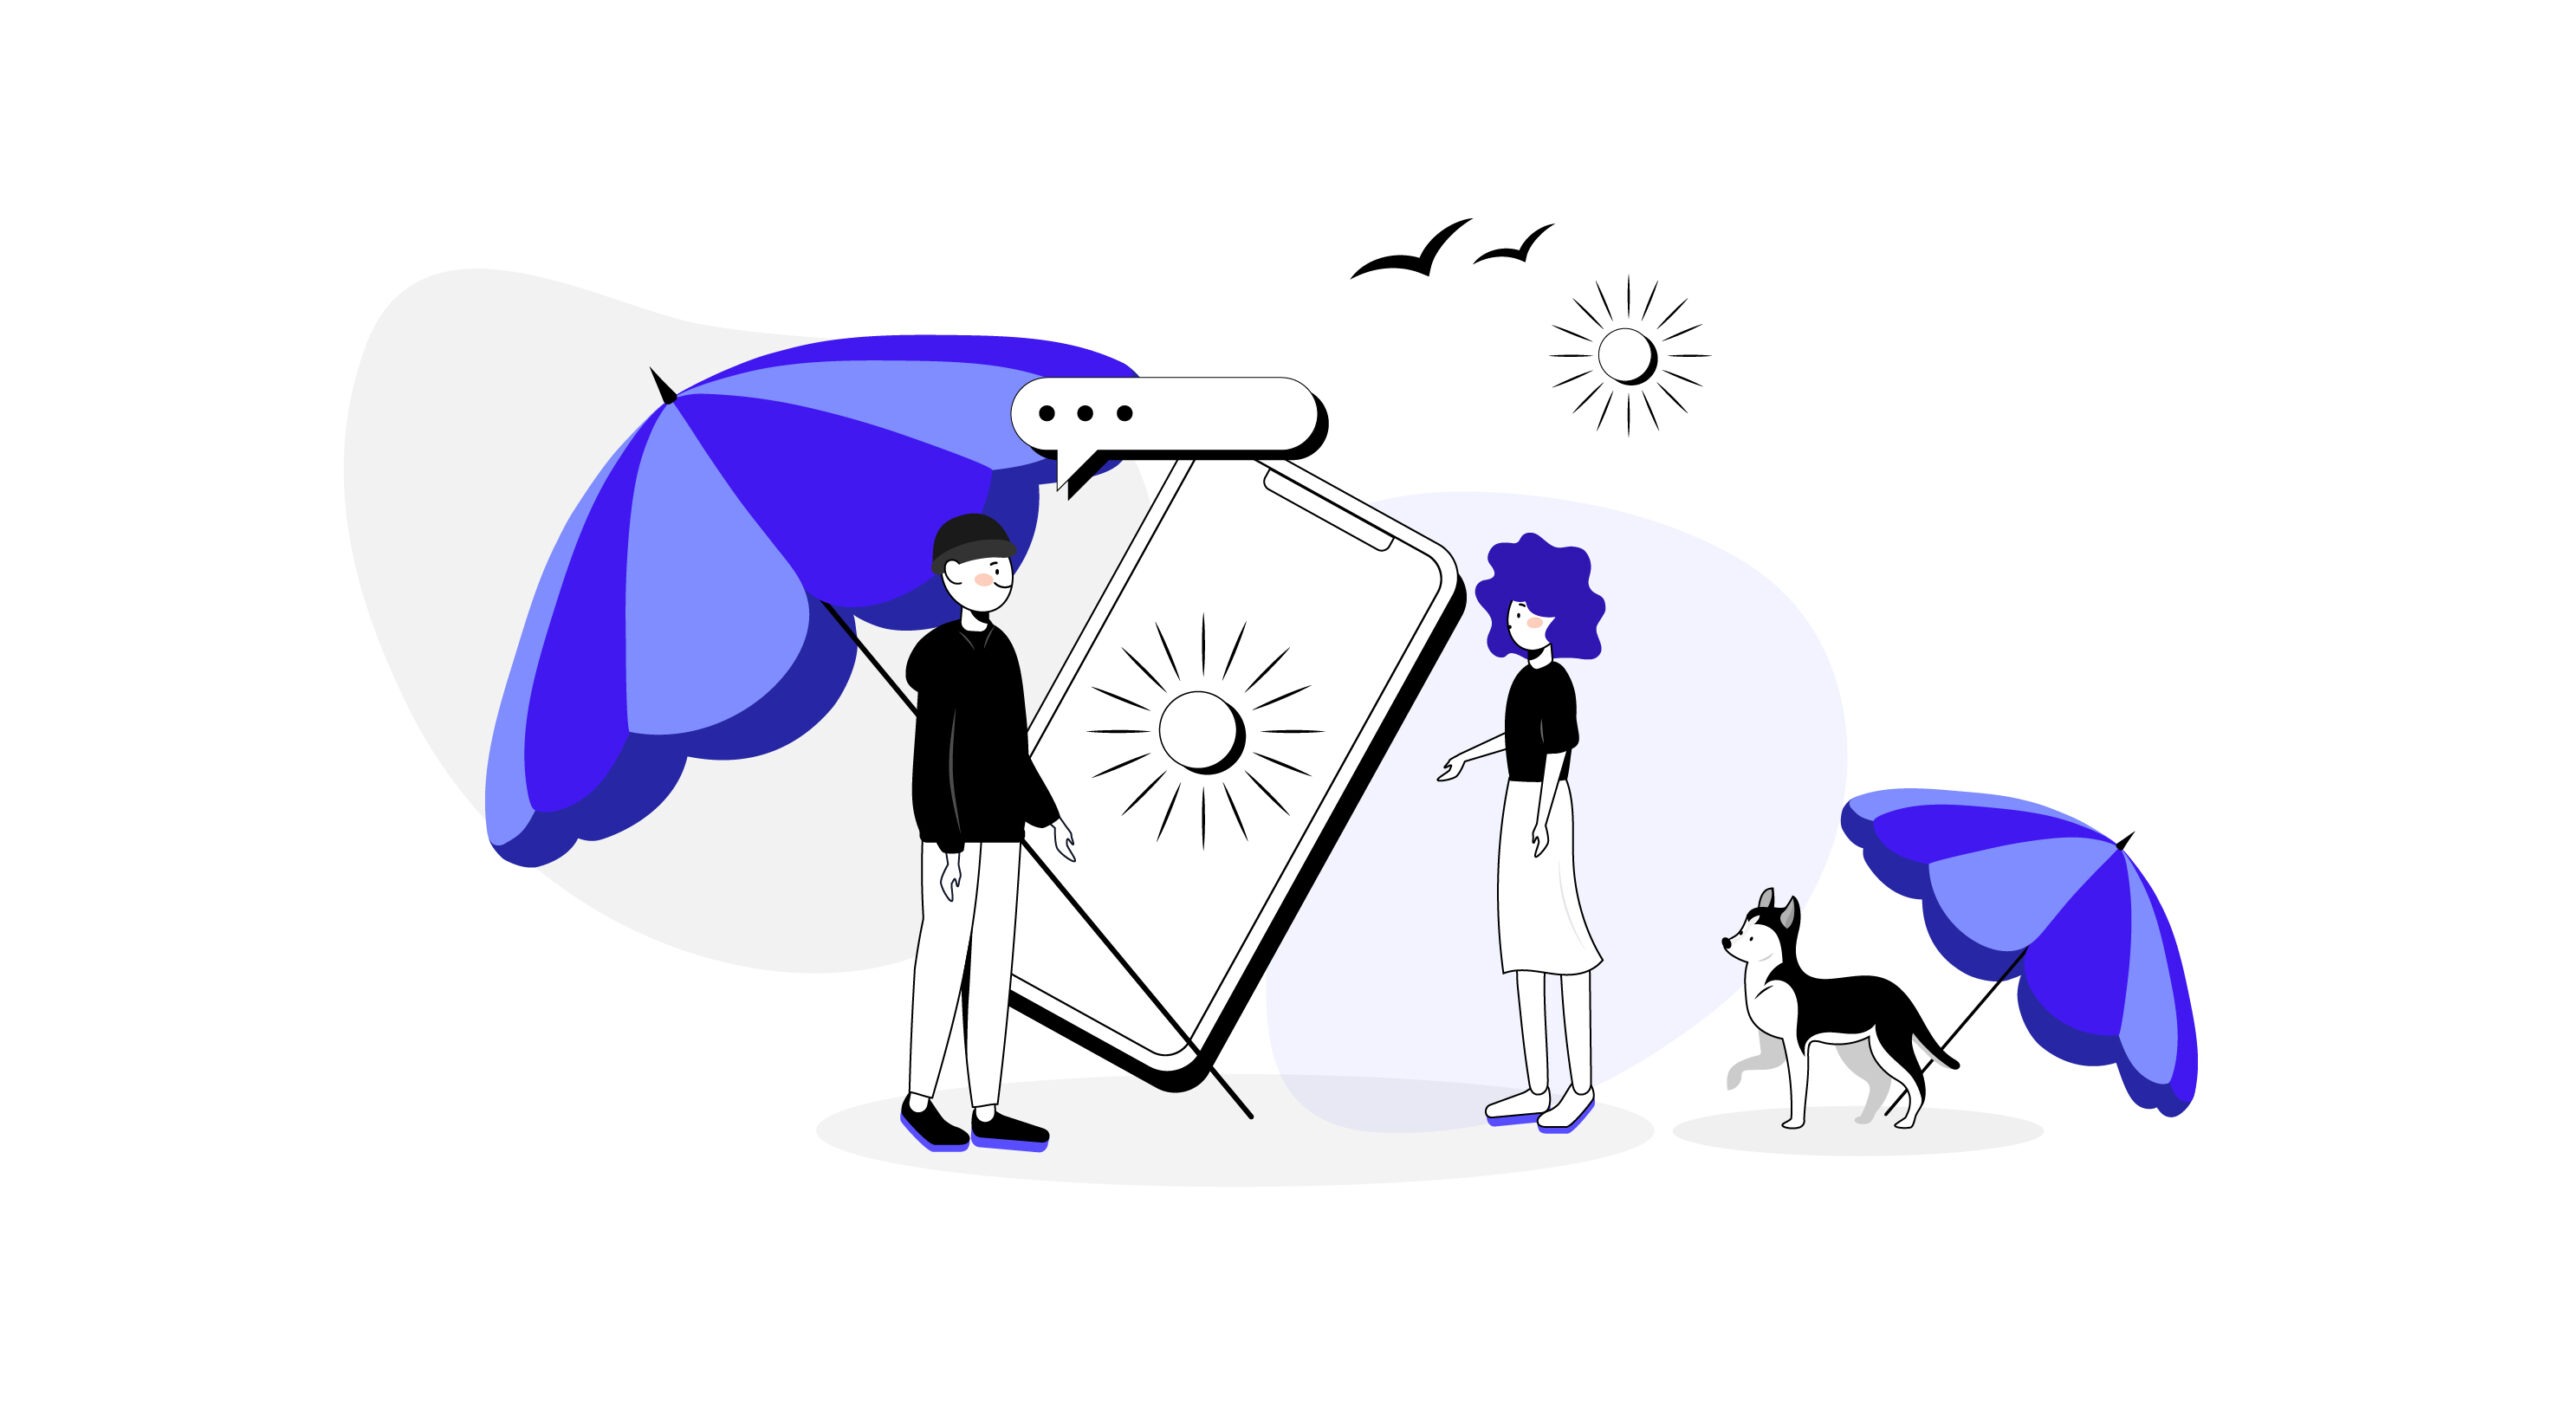 Illustration of a three people, one dog and a phone device, created by Kambu